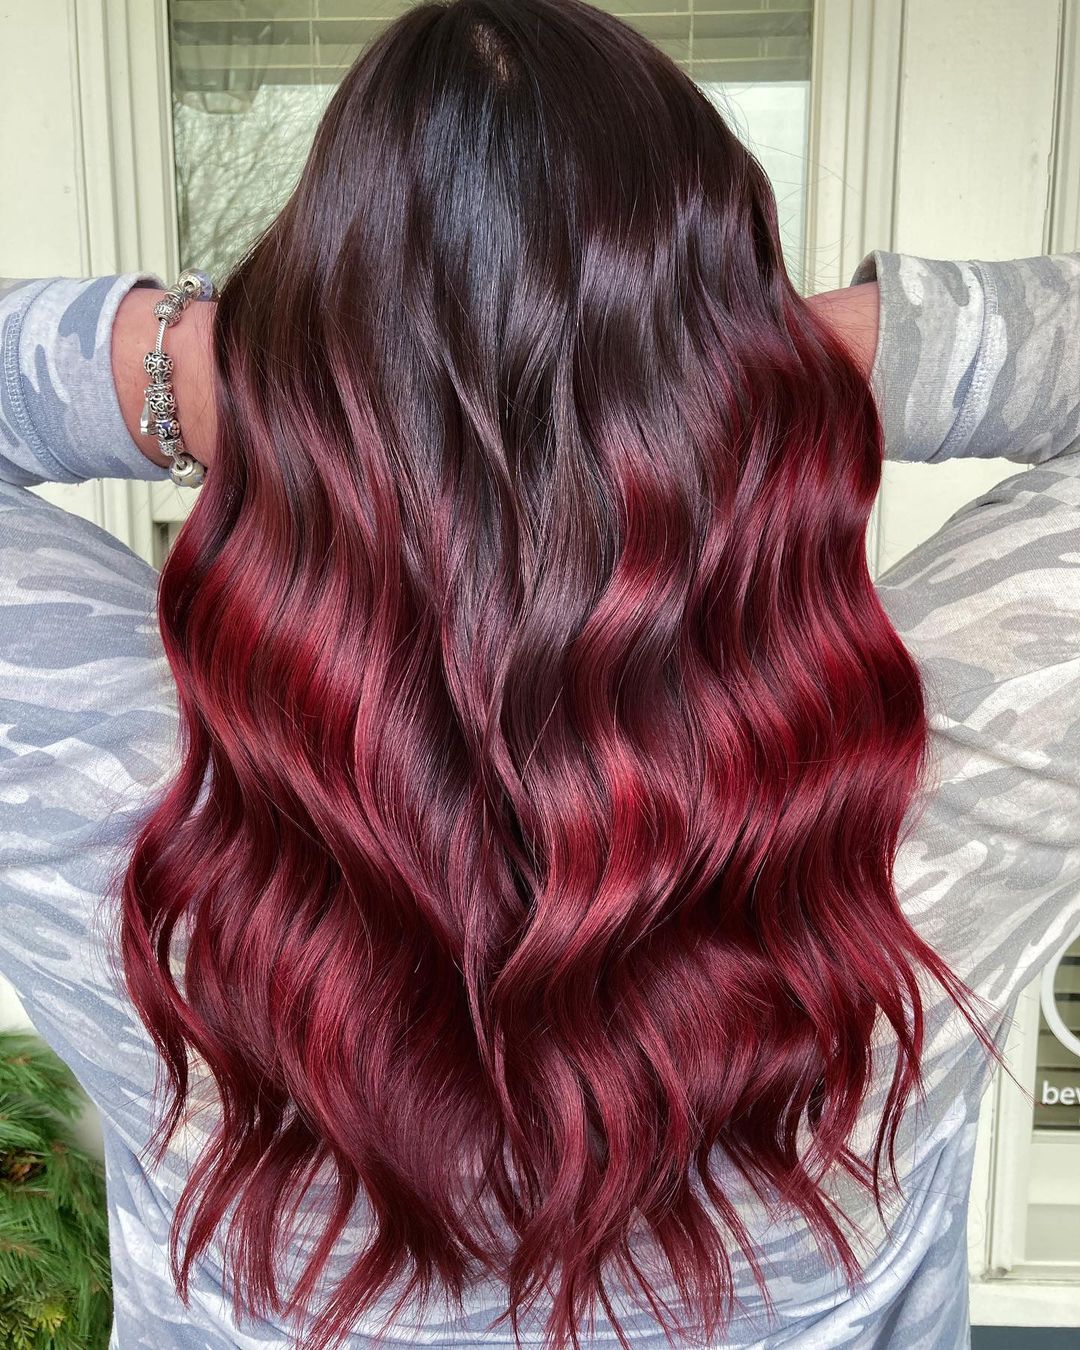 Dark Brown-to-Red Ombre Hair Color